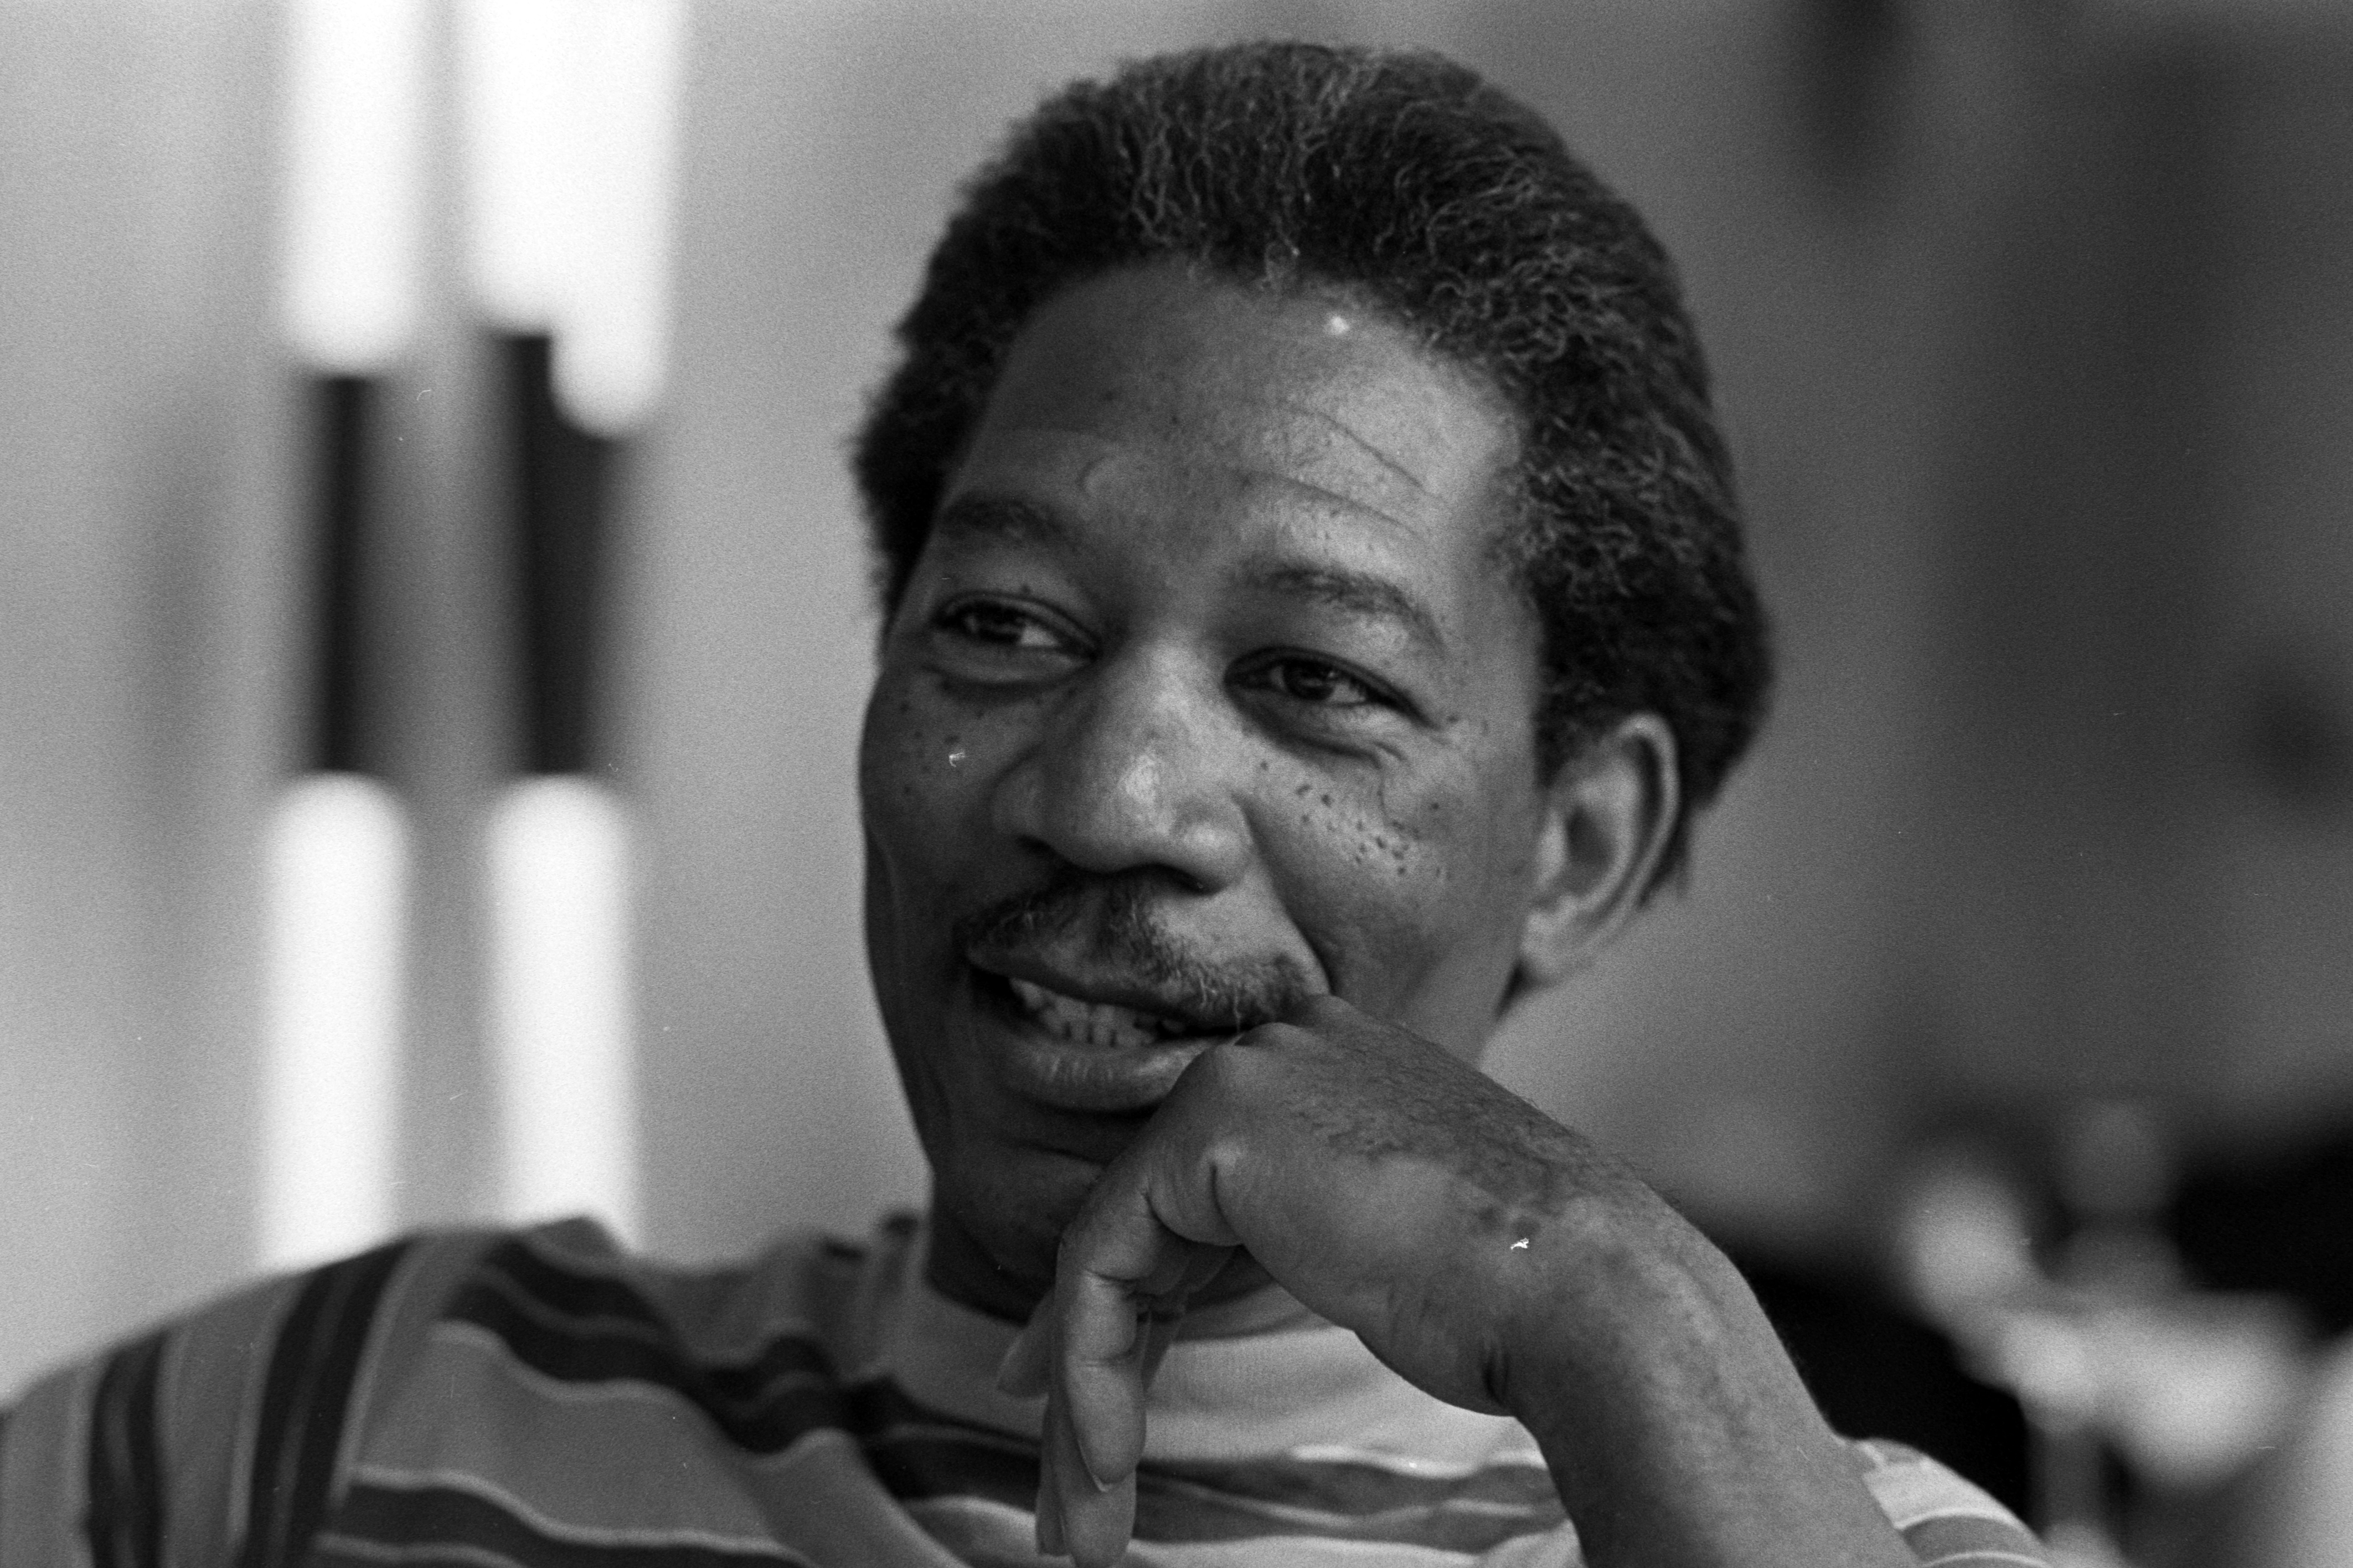 Morgan Freeman in a striped shirt, resting chin on hand with a thoughtful expression